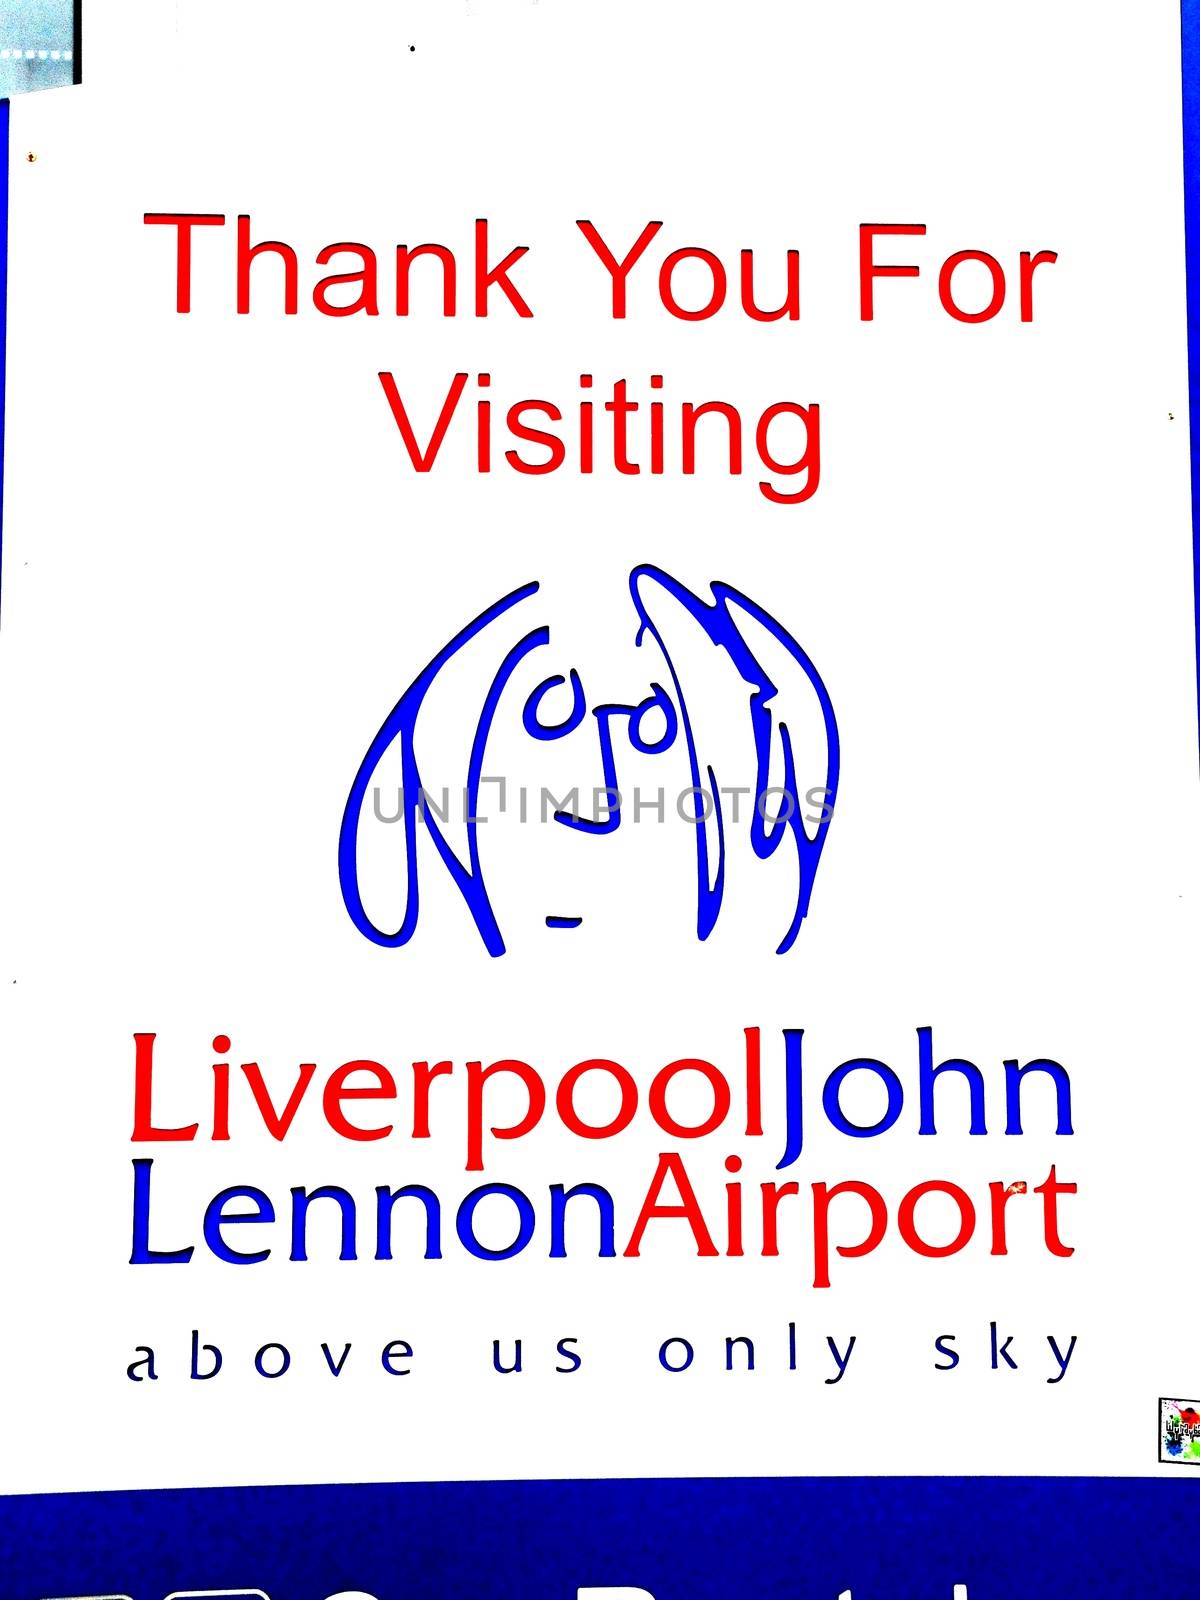 Thank you message on leaving John Lennon airport Liverpool